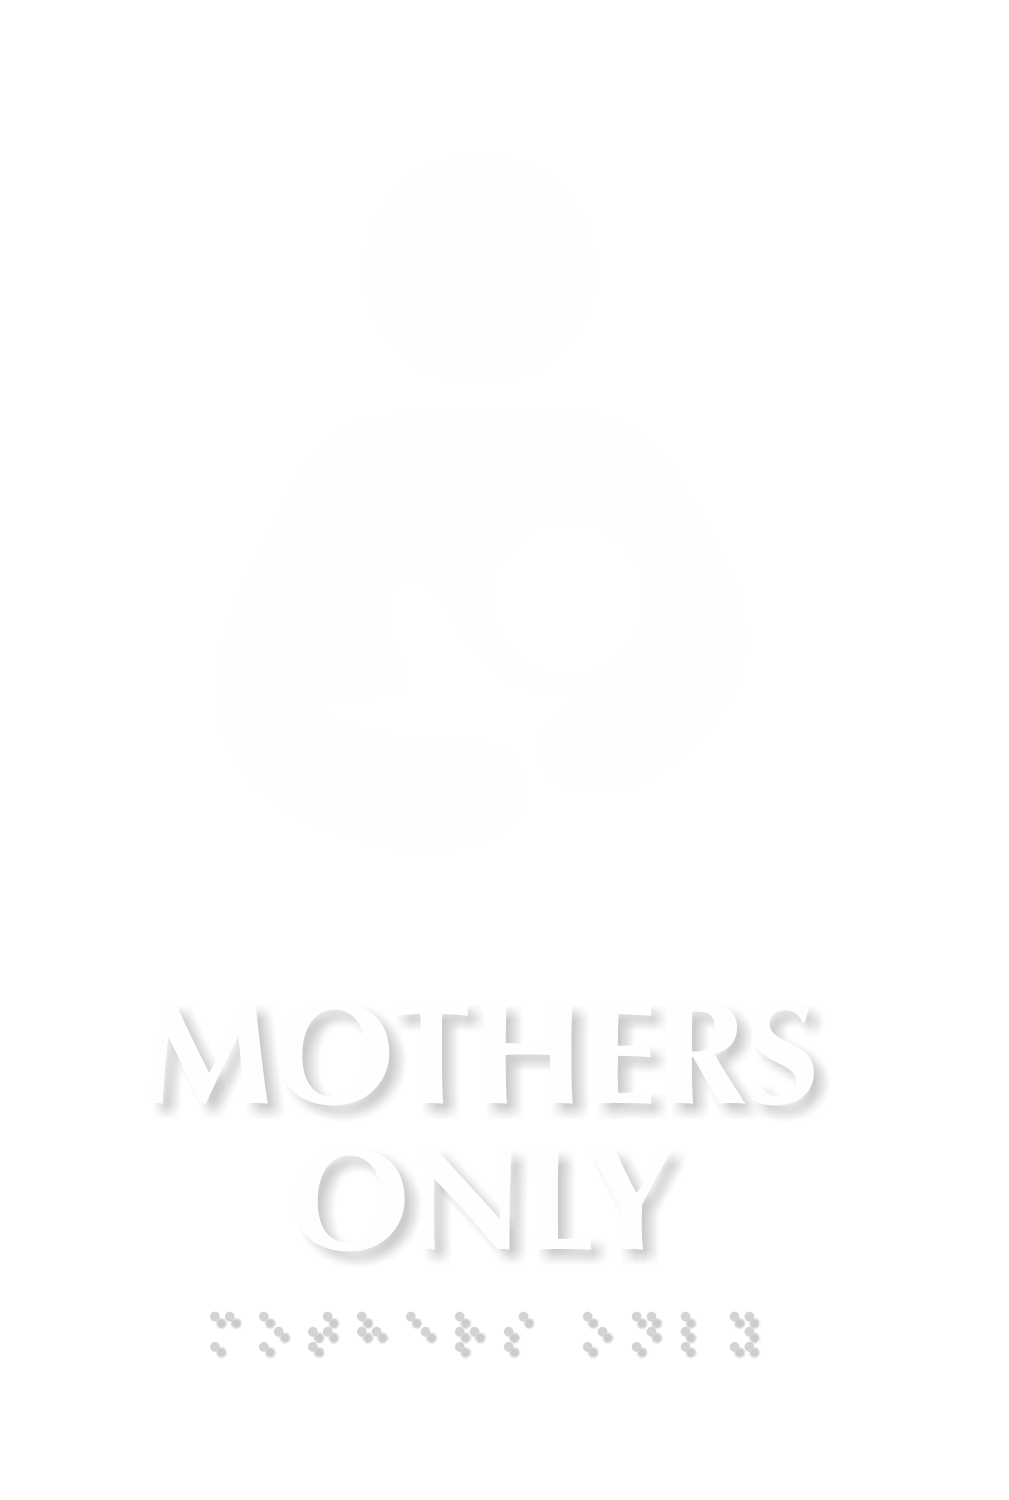 Mothers Only TactileTouch Braille Sign